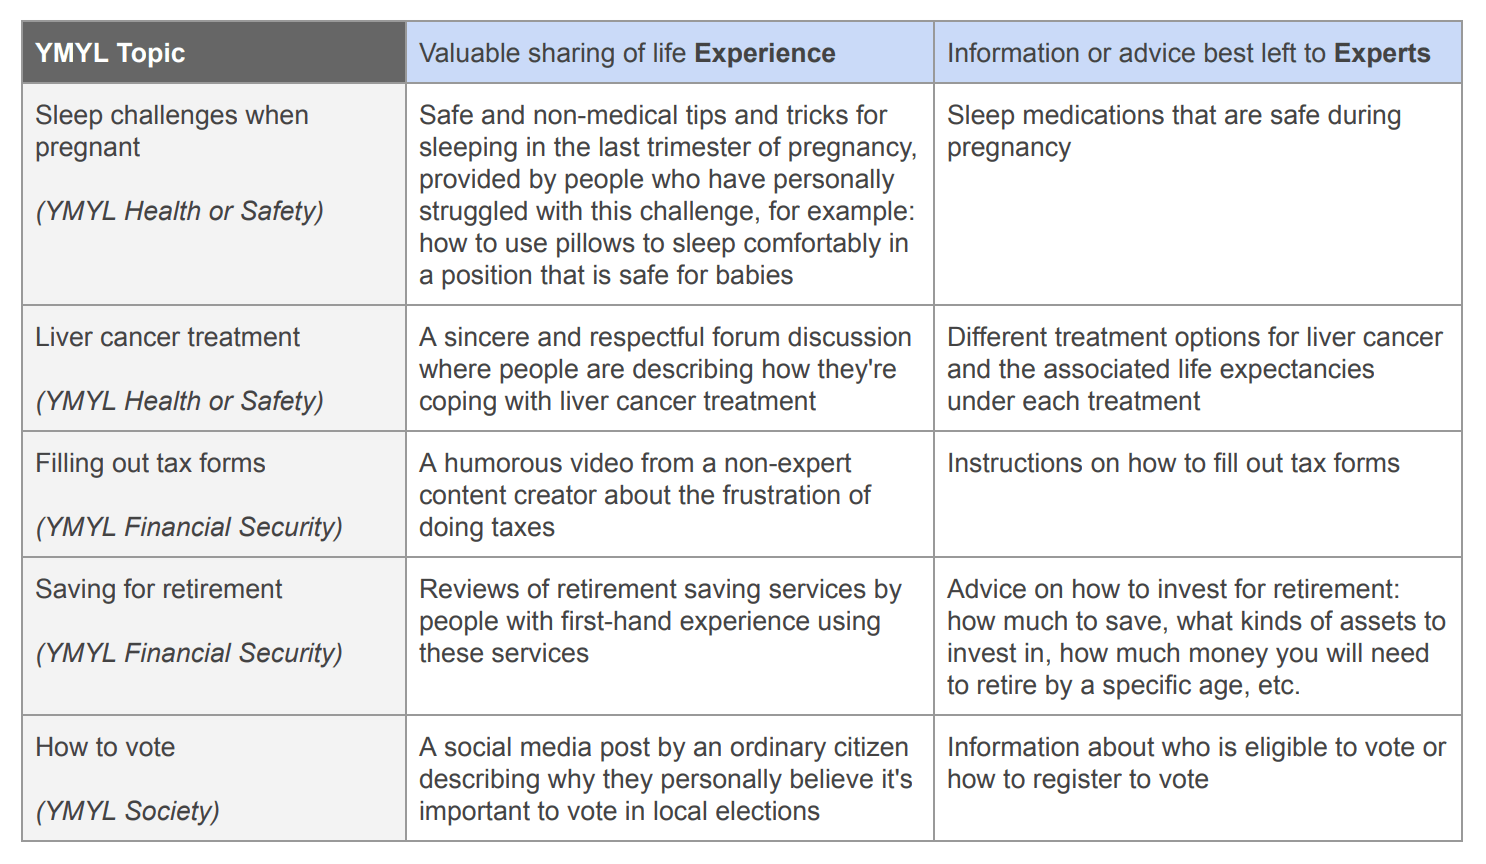 The difference between experience and expertise for YMYL topics